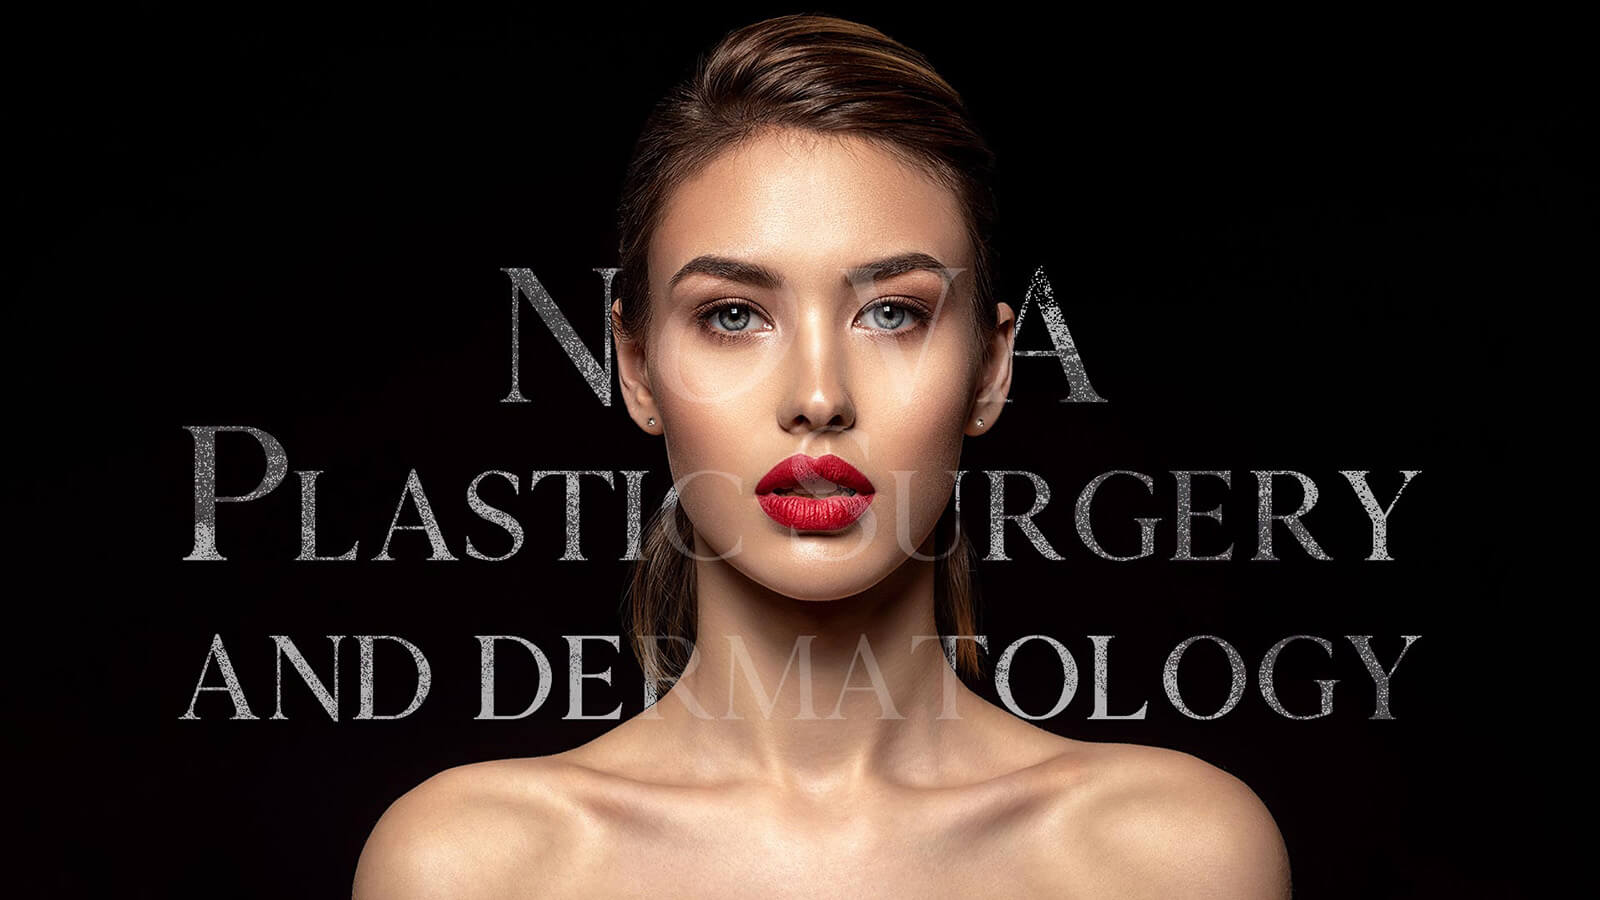 Nova practice title printed over female model with bare shoulders and red lips